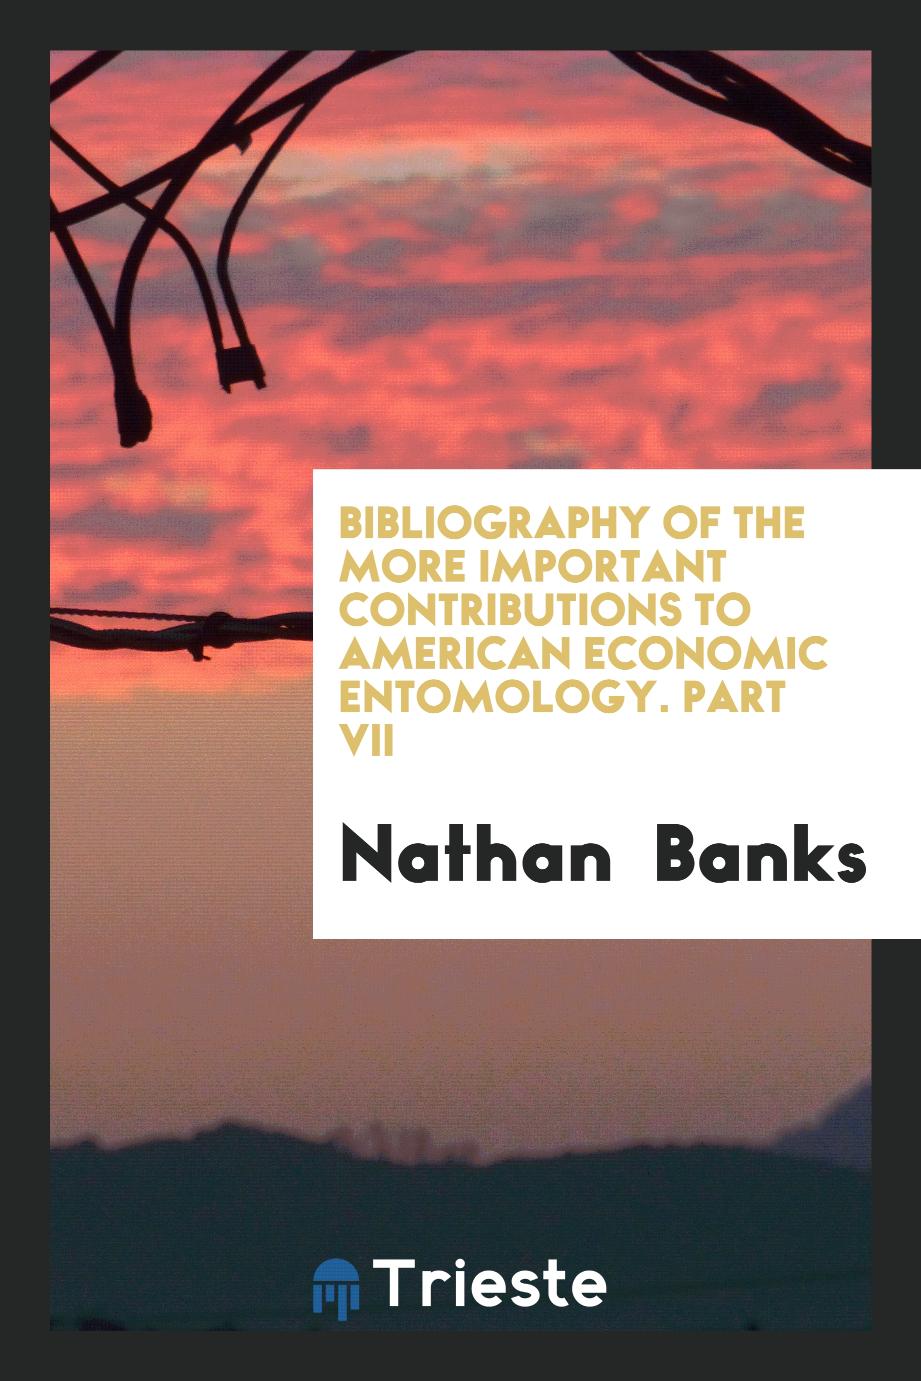 Bibliography of the More Important Contributions to American Economic Entomology. Part VII